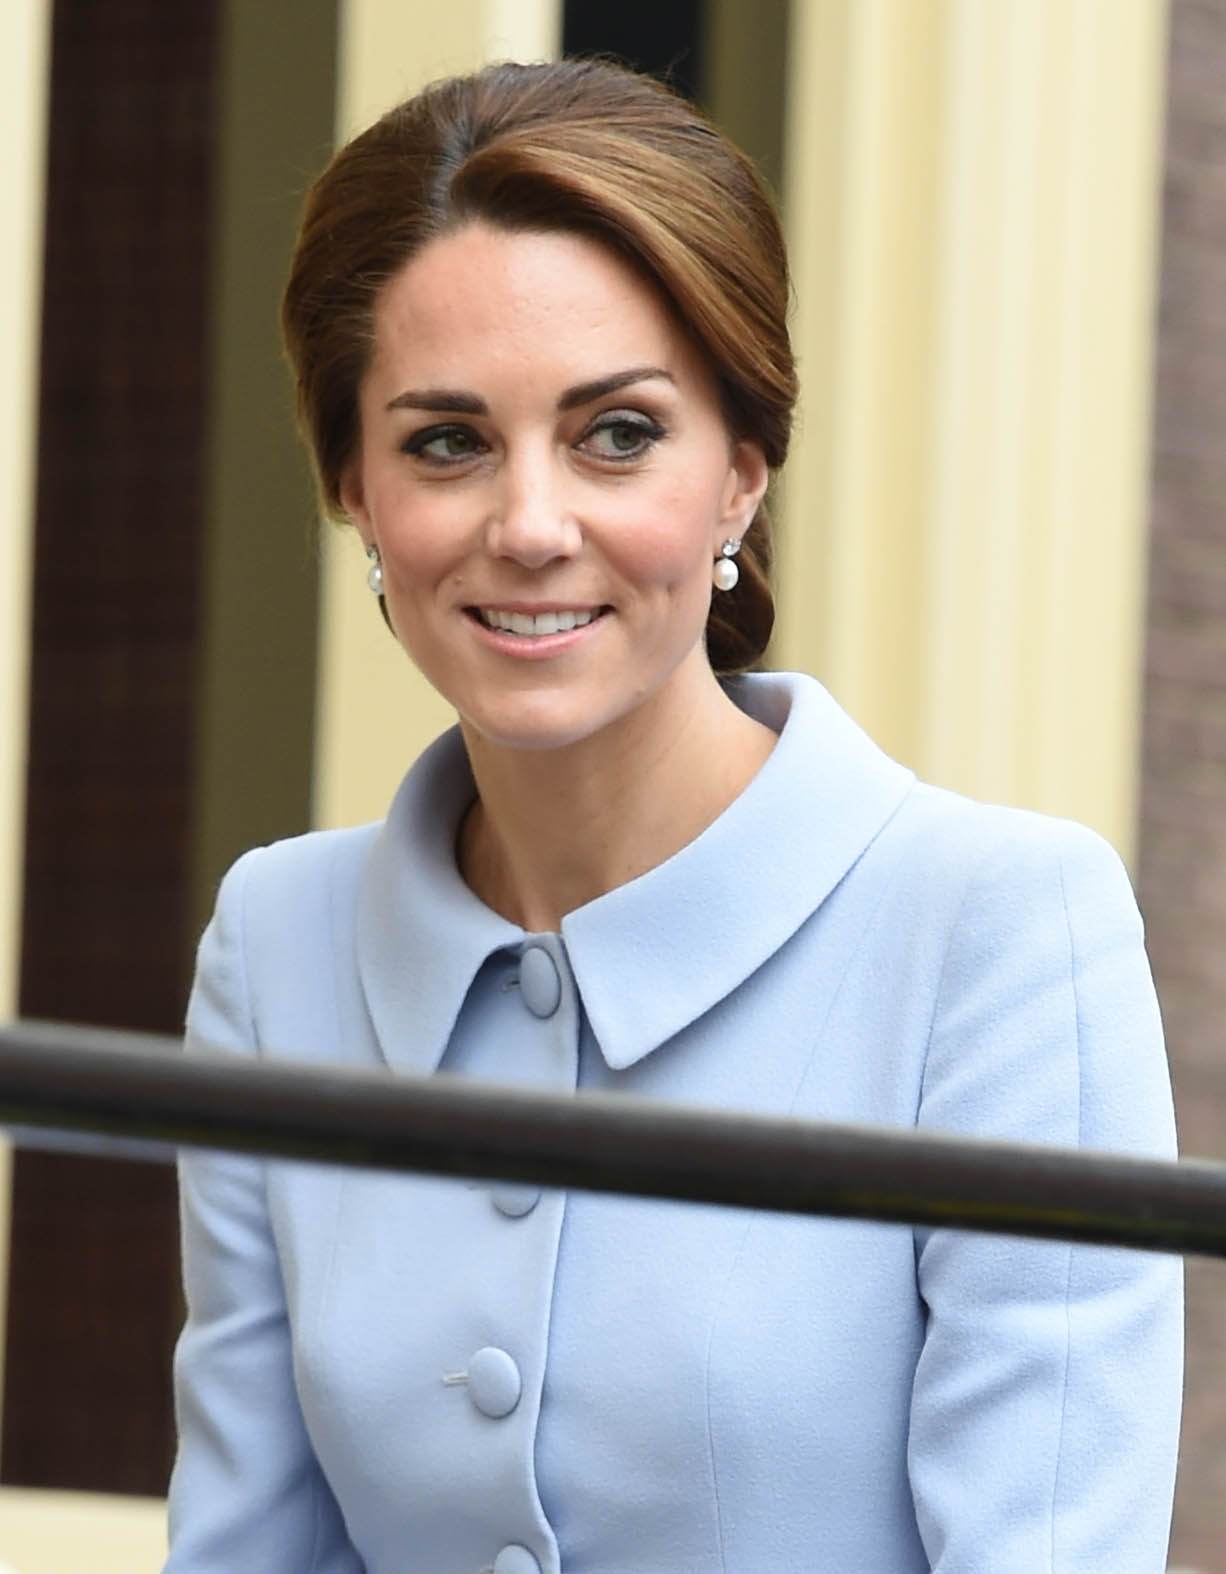 The Duchess of Cambridge visits The Netherlands for a day of official engagements in The Hague and Rotterdam. (KGC-03/STAR MAX/IPx—KGC-03/STAR MAX/IPx)